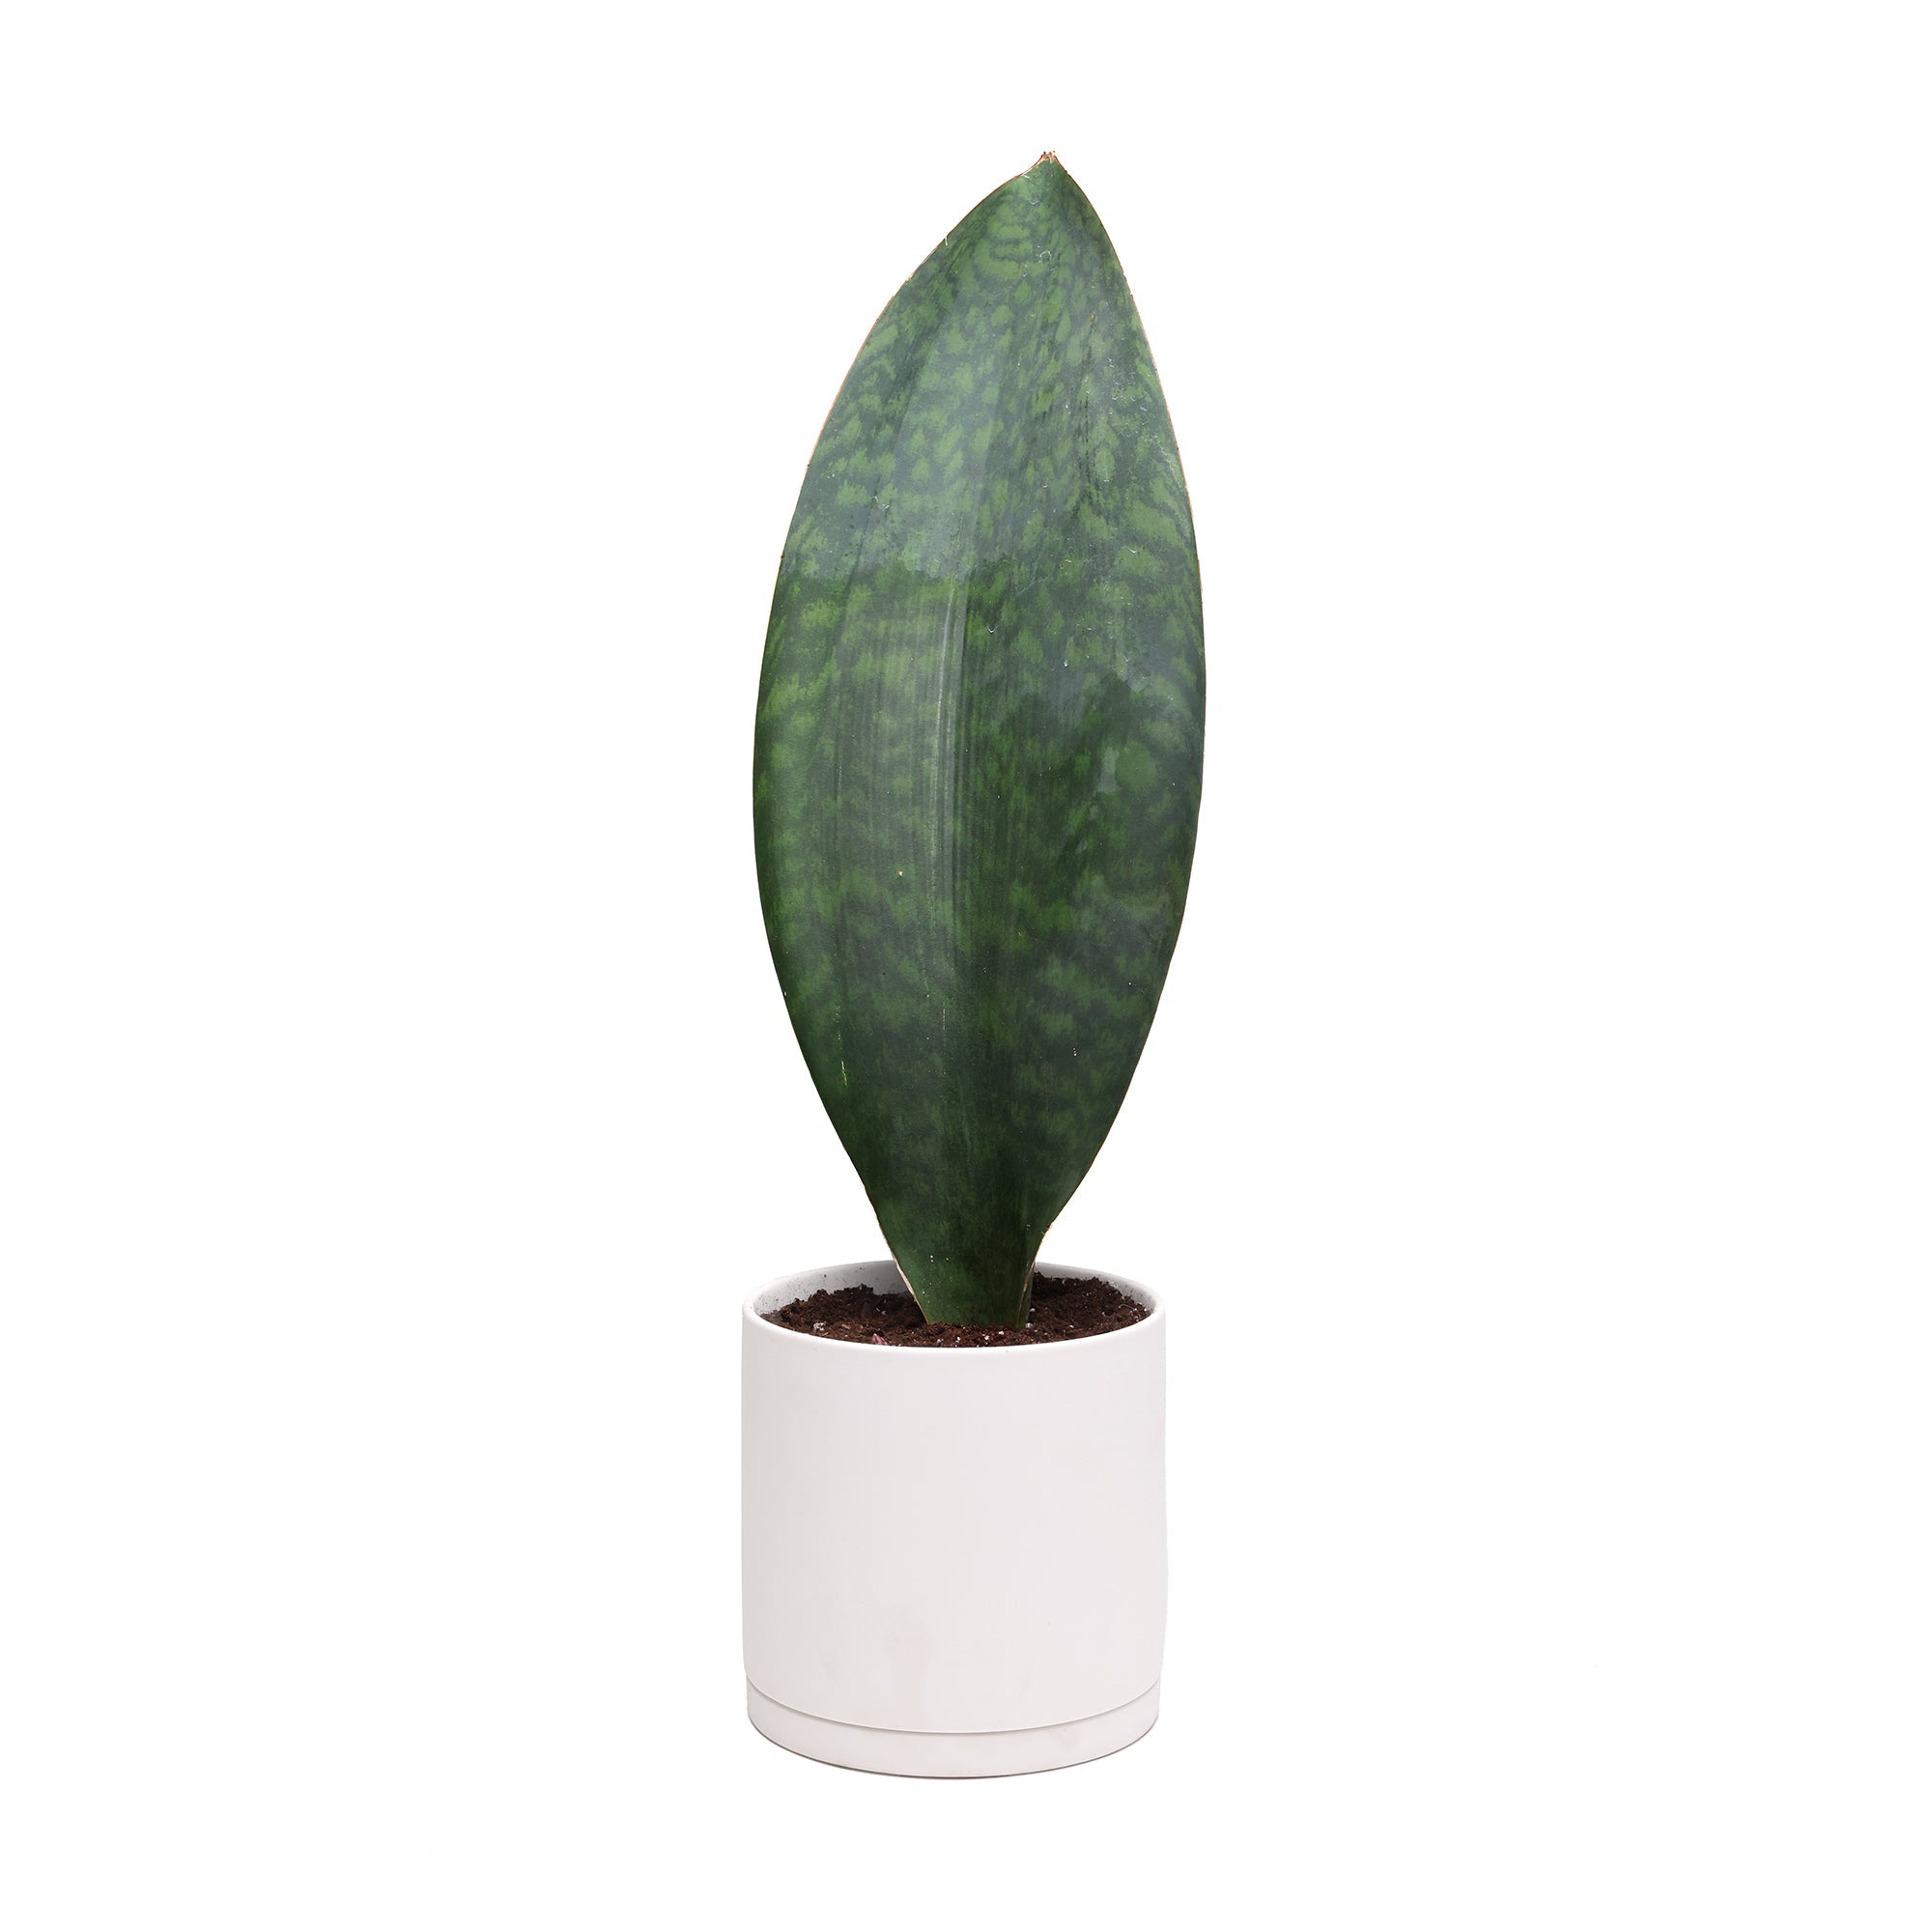 A single, upright, low maintenance Chive Studio Potted Snake Plant Victoria 6” leaf with distinct green patterning, positioned in a minimalist white pot against a plain white background.